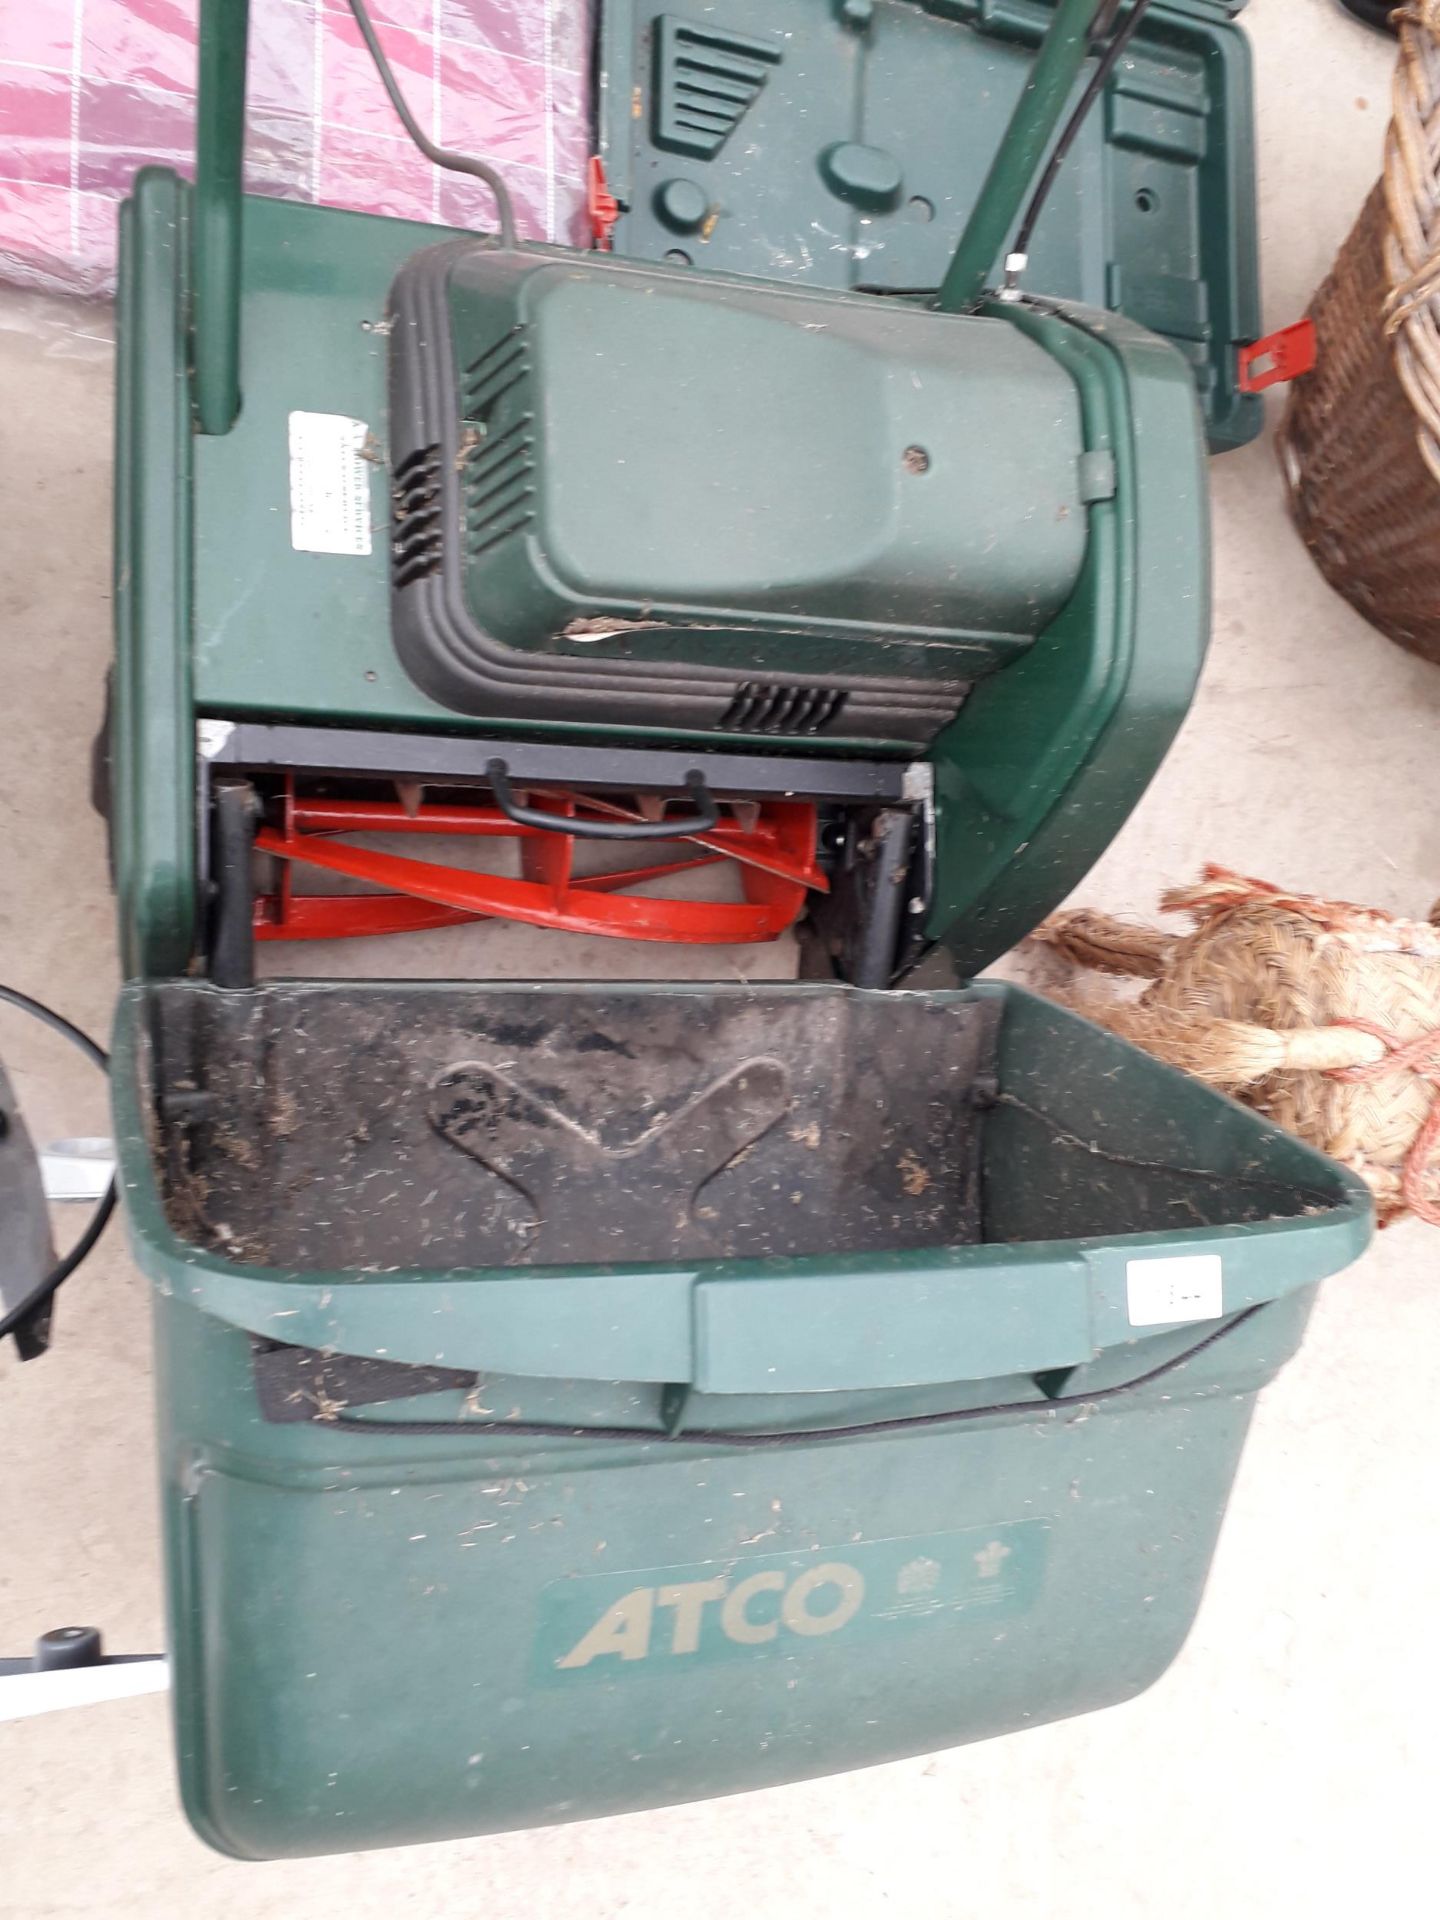 AN ELECTRIC ATCO LAWN MOWER COMPLETE WITH GRASS BOX - Image 2 of 2